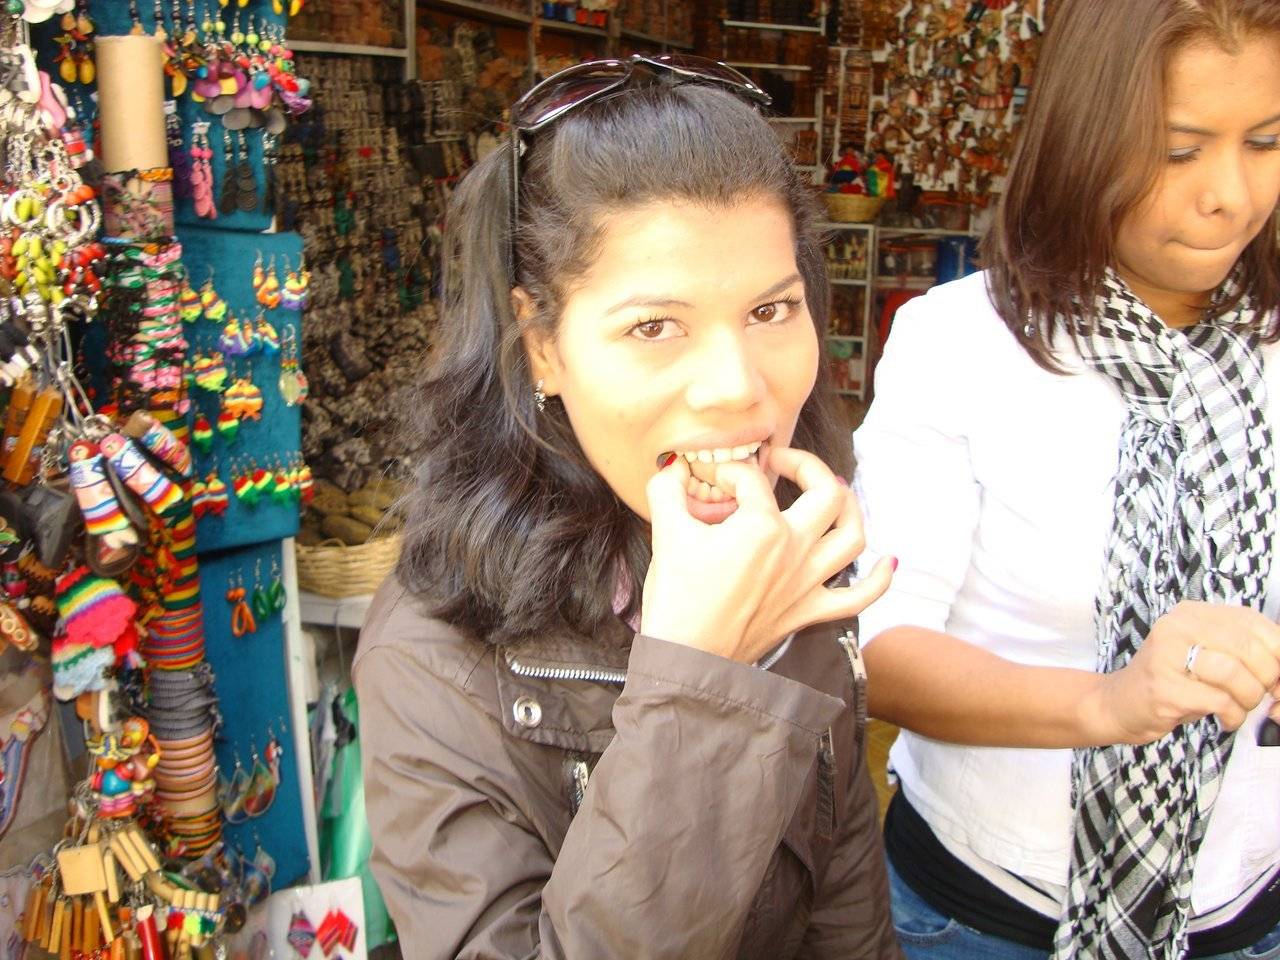 Chewing coca leaves to combat soroche